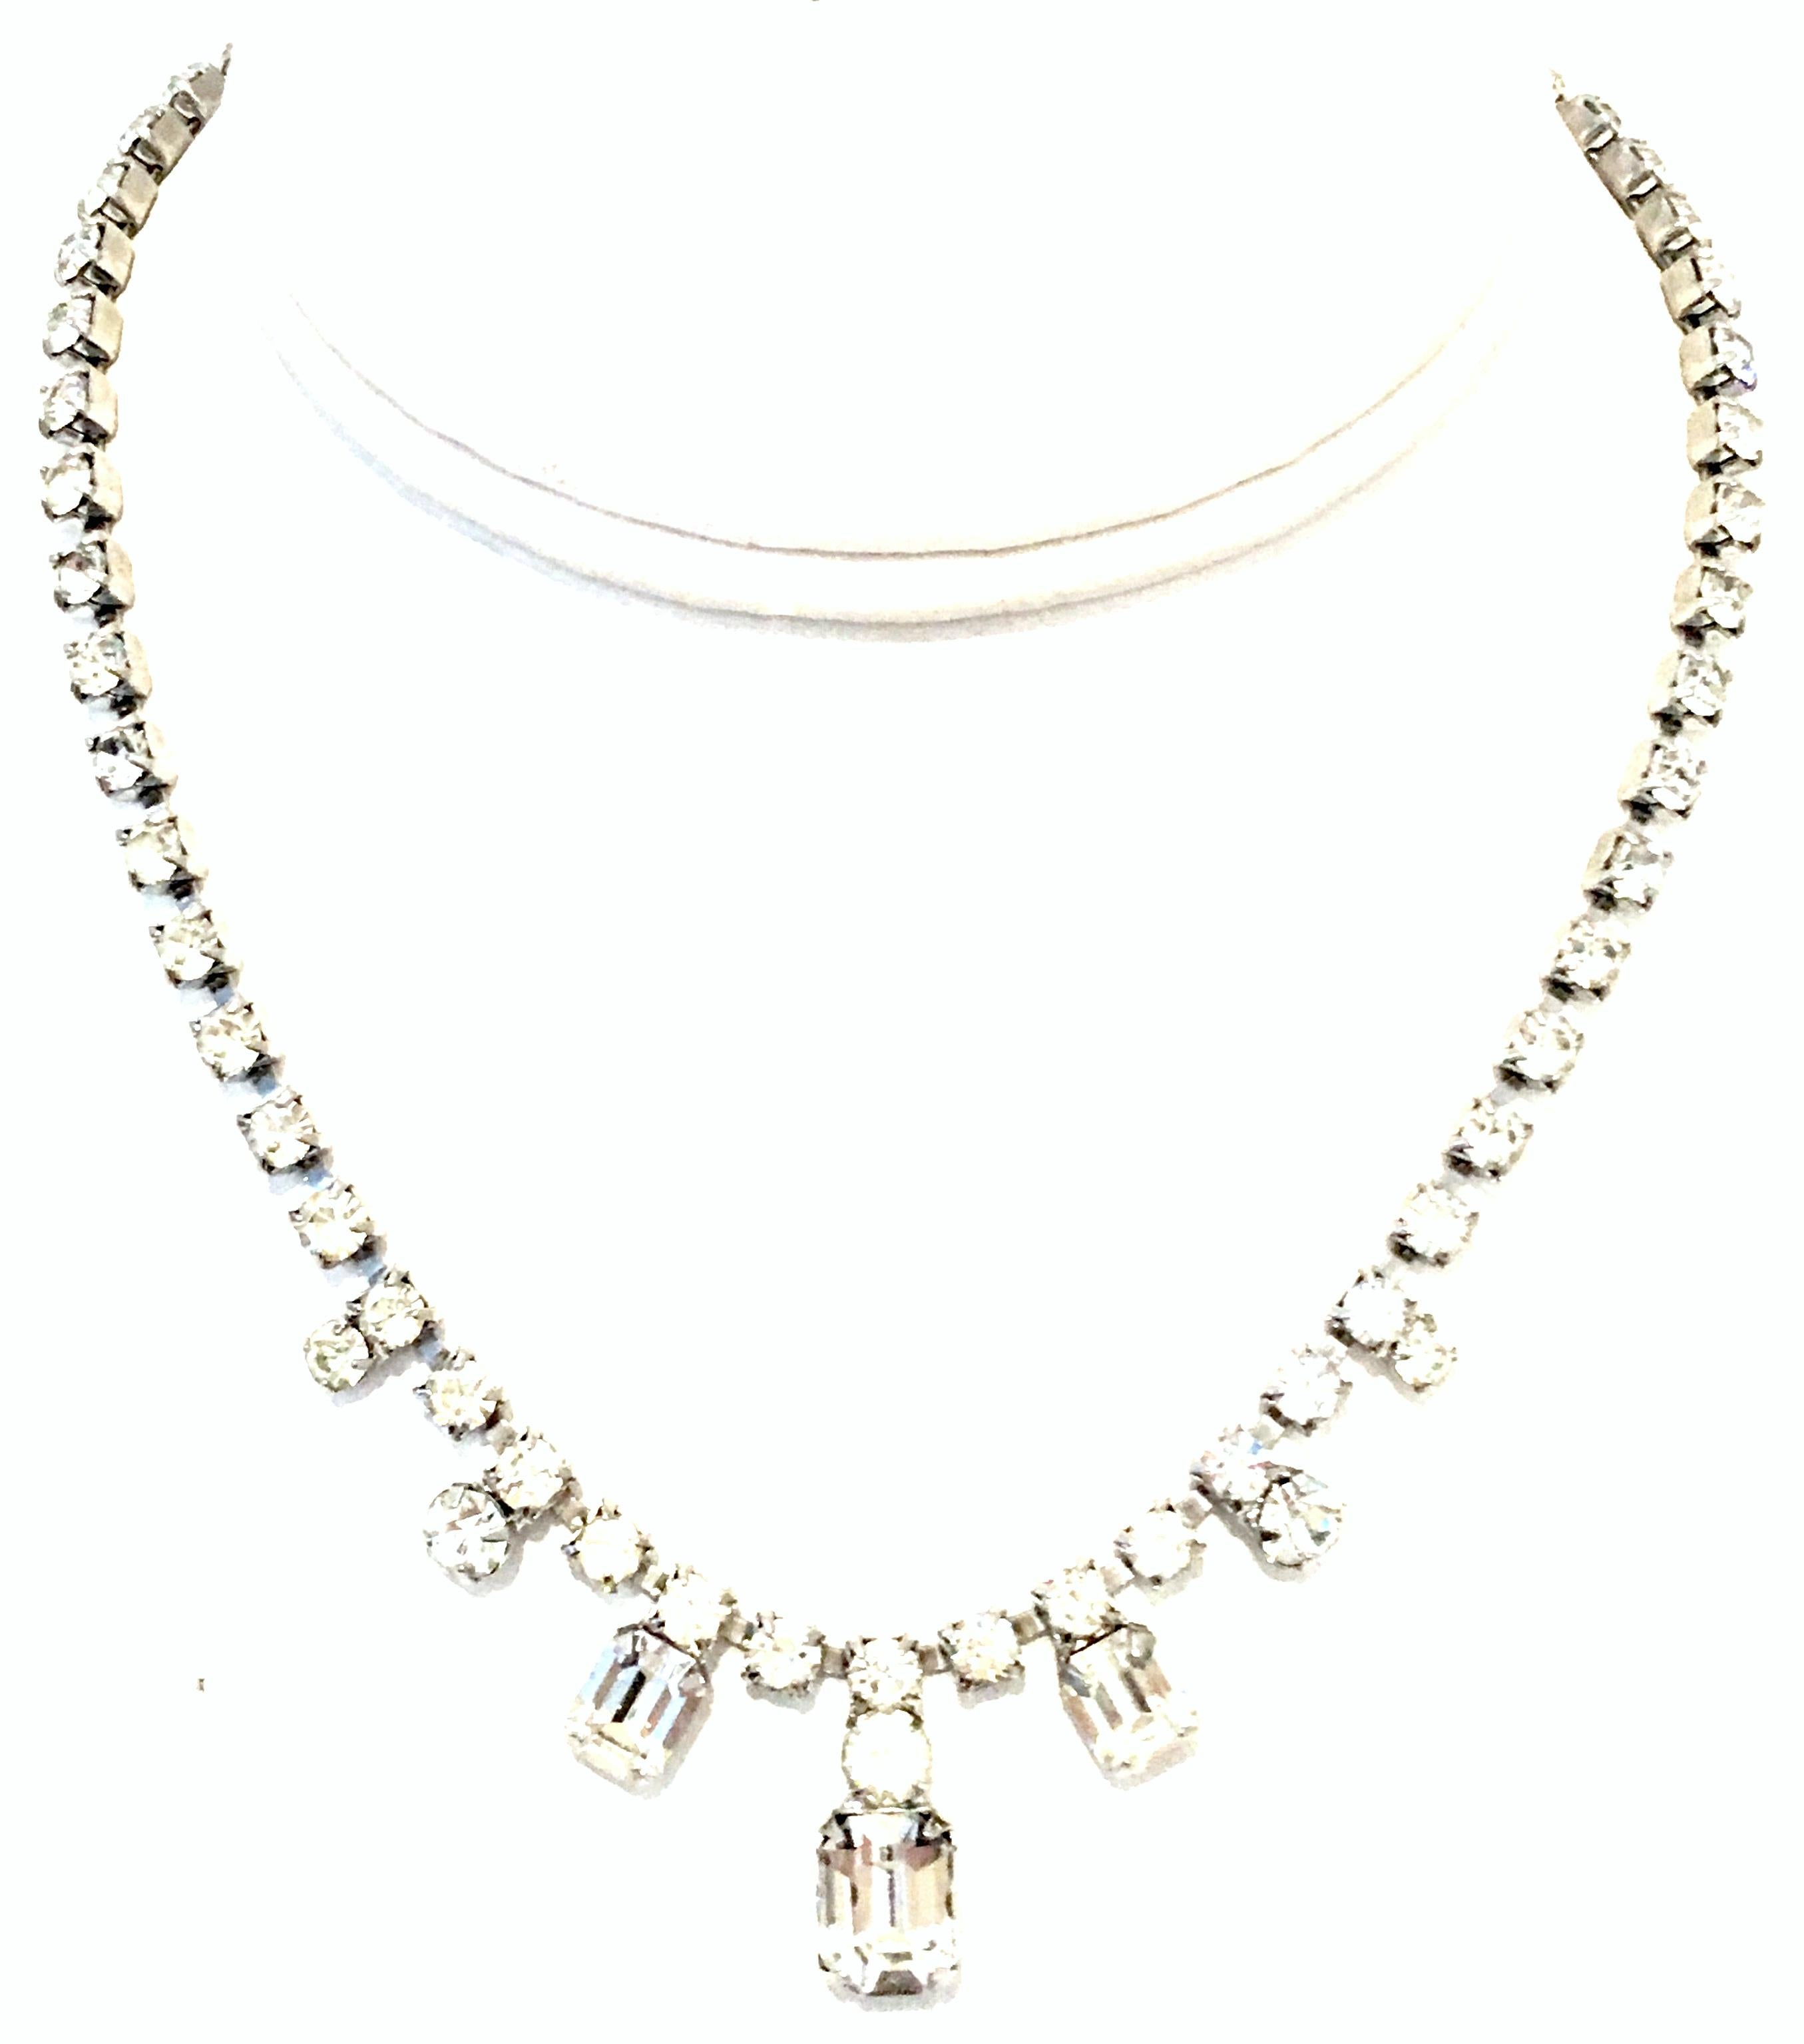 20th Century Silver & Austrian Crystal Choker Style Necklace By, Weiss.
This timeless piece features rhodium silver plate with brilliant cut and faceted colorless Austrian crystal prong set stones. Adjustable hook clasp. Signed on the underside,